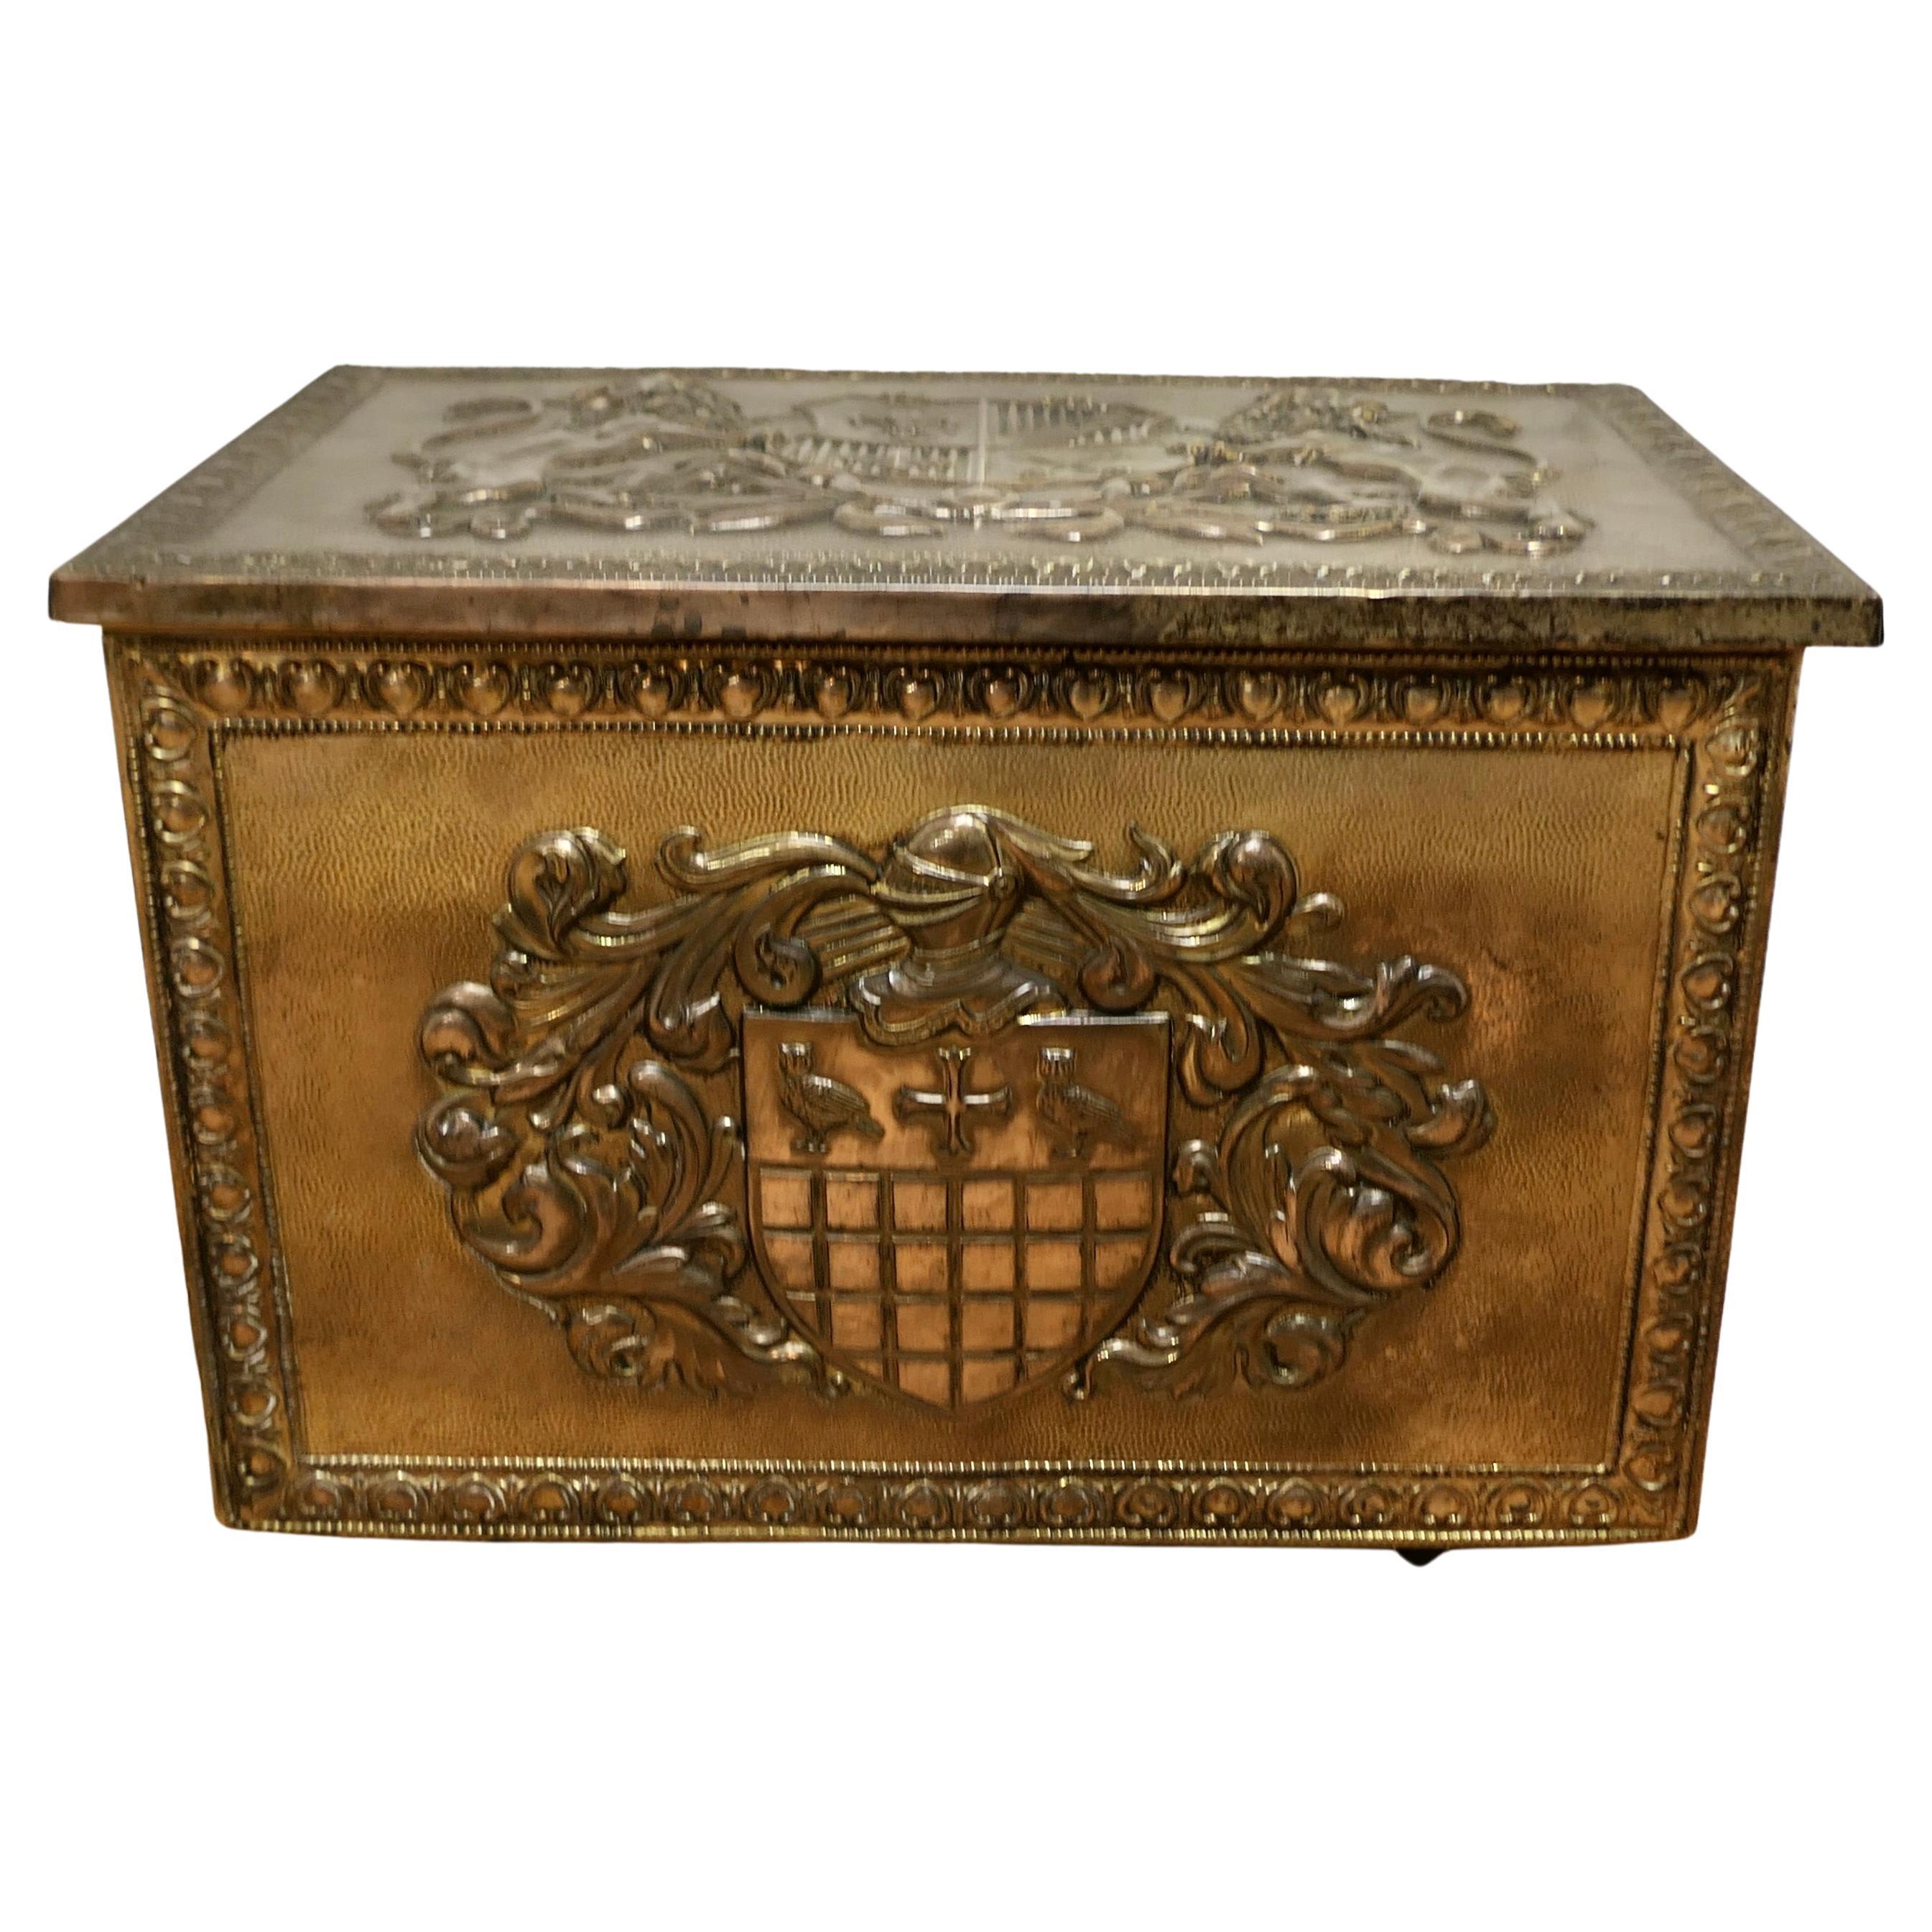 Heraldic Embossed Brass Log Box, with Coats of Arms